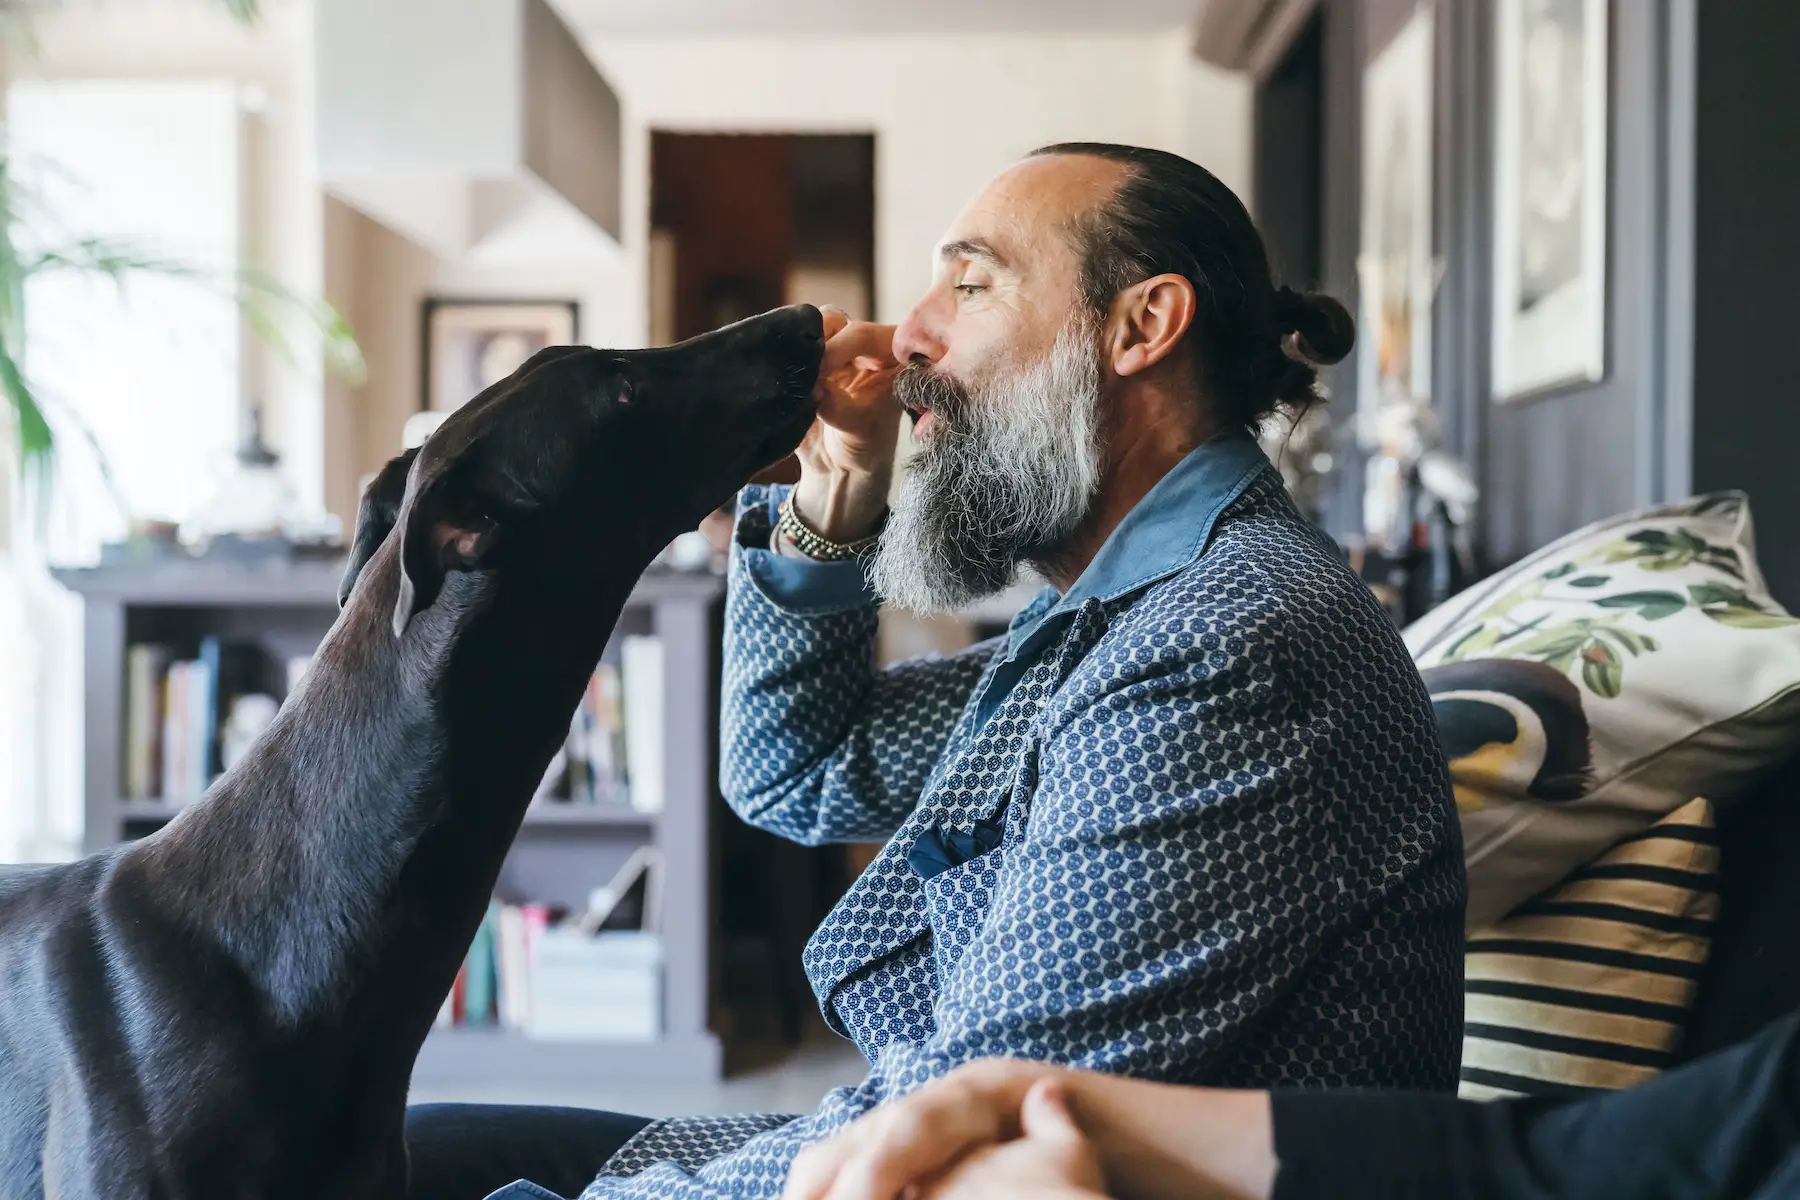 A bearded man holds up a treat for his large black dog to take from right in front of his face.